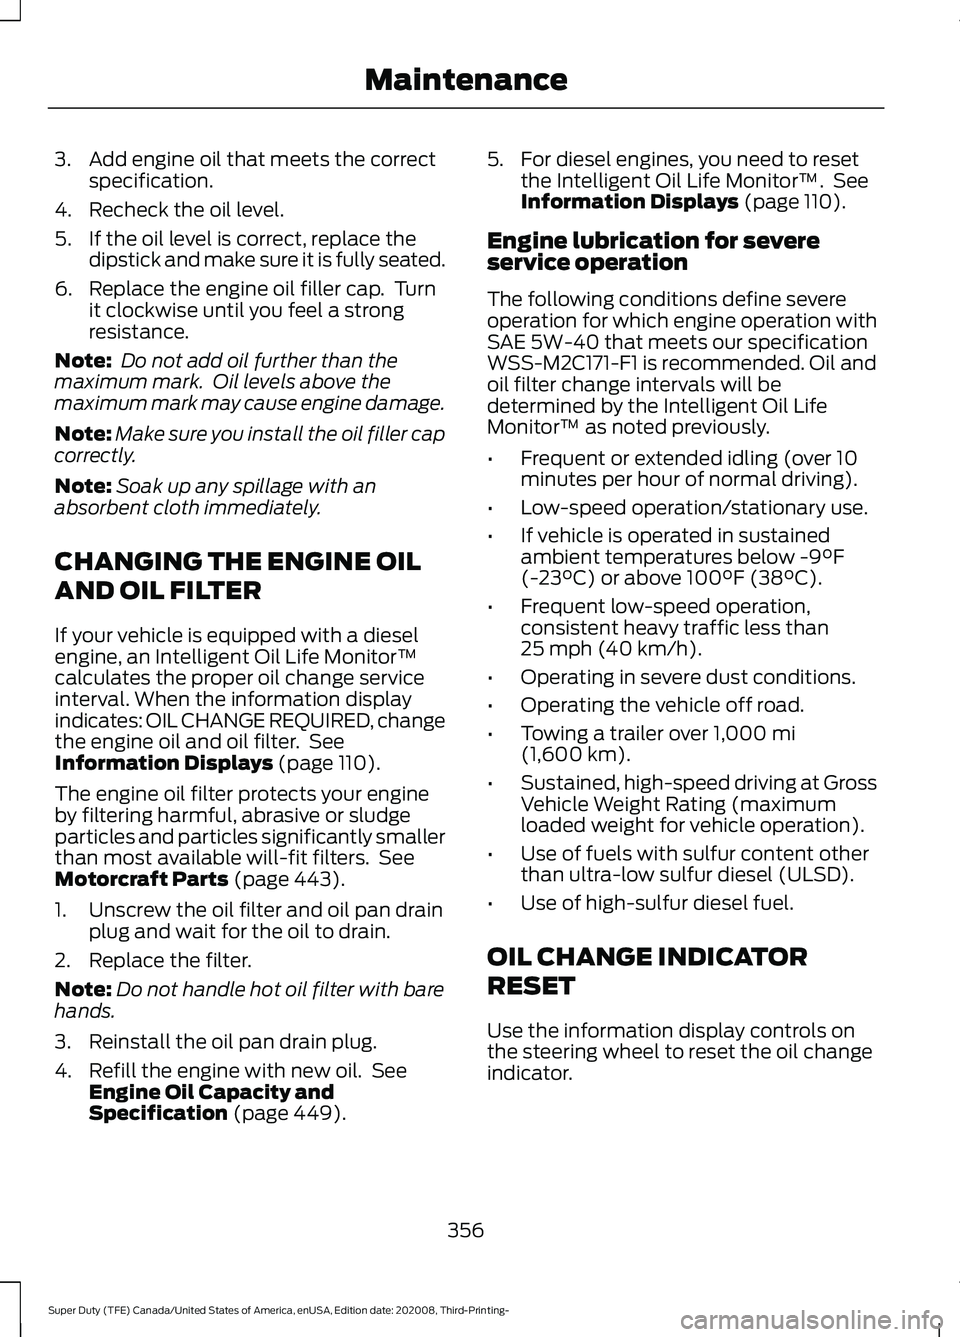 FORD F-450 2021  Owners Manual 3. Add engine oil that meets the correct
specification.
4. Recheck the oil level.
5. If the oil level is correct, replace the dipstick and make sure it is fully seated.
6. Replace the engine oil fille